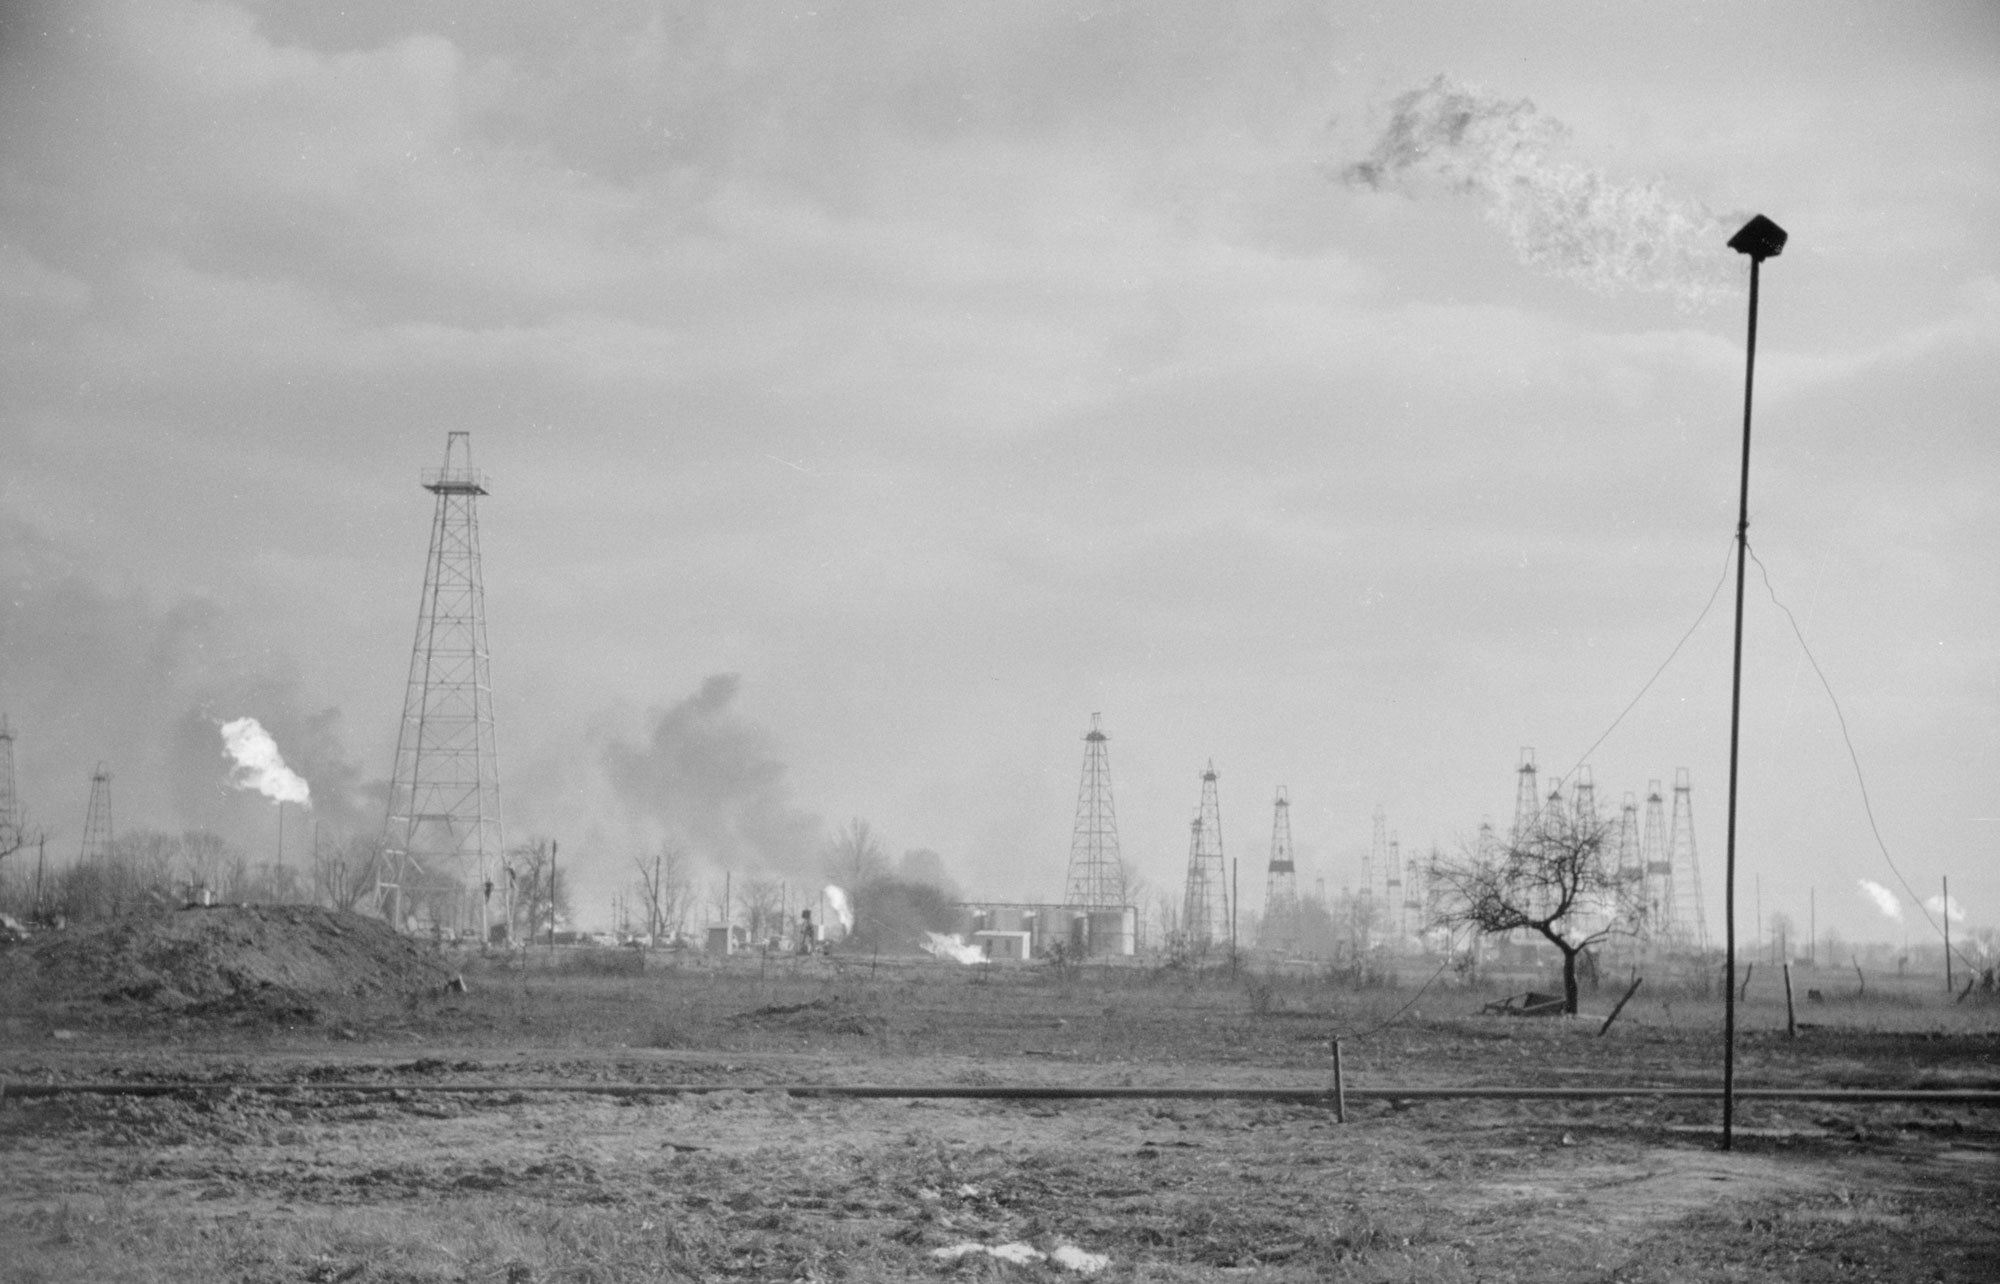 Black and white photo of an oilfield in Marion County, Illinois, in 1940. The photo shows a flat landscape beneath an overcast sky. Oil derricks and gas flares dot the landscapes. Other structures ca be seen in the far distance behind some derricks.